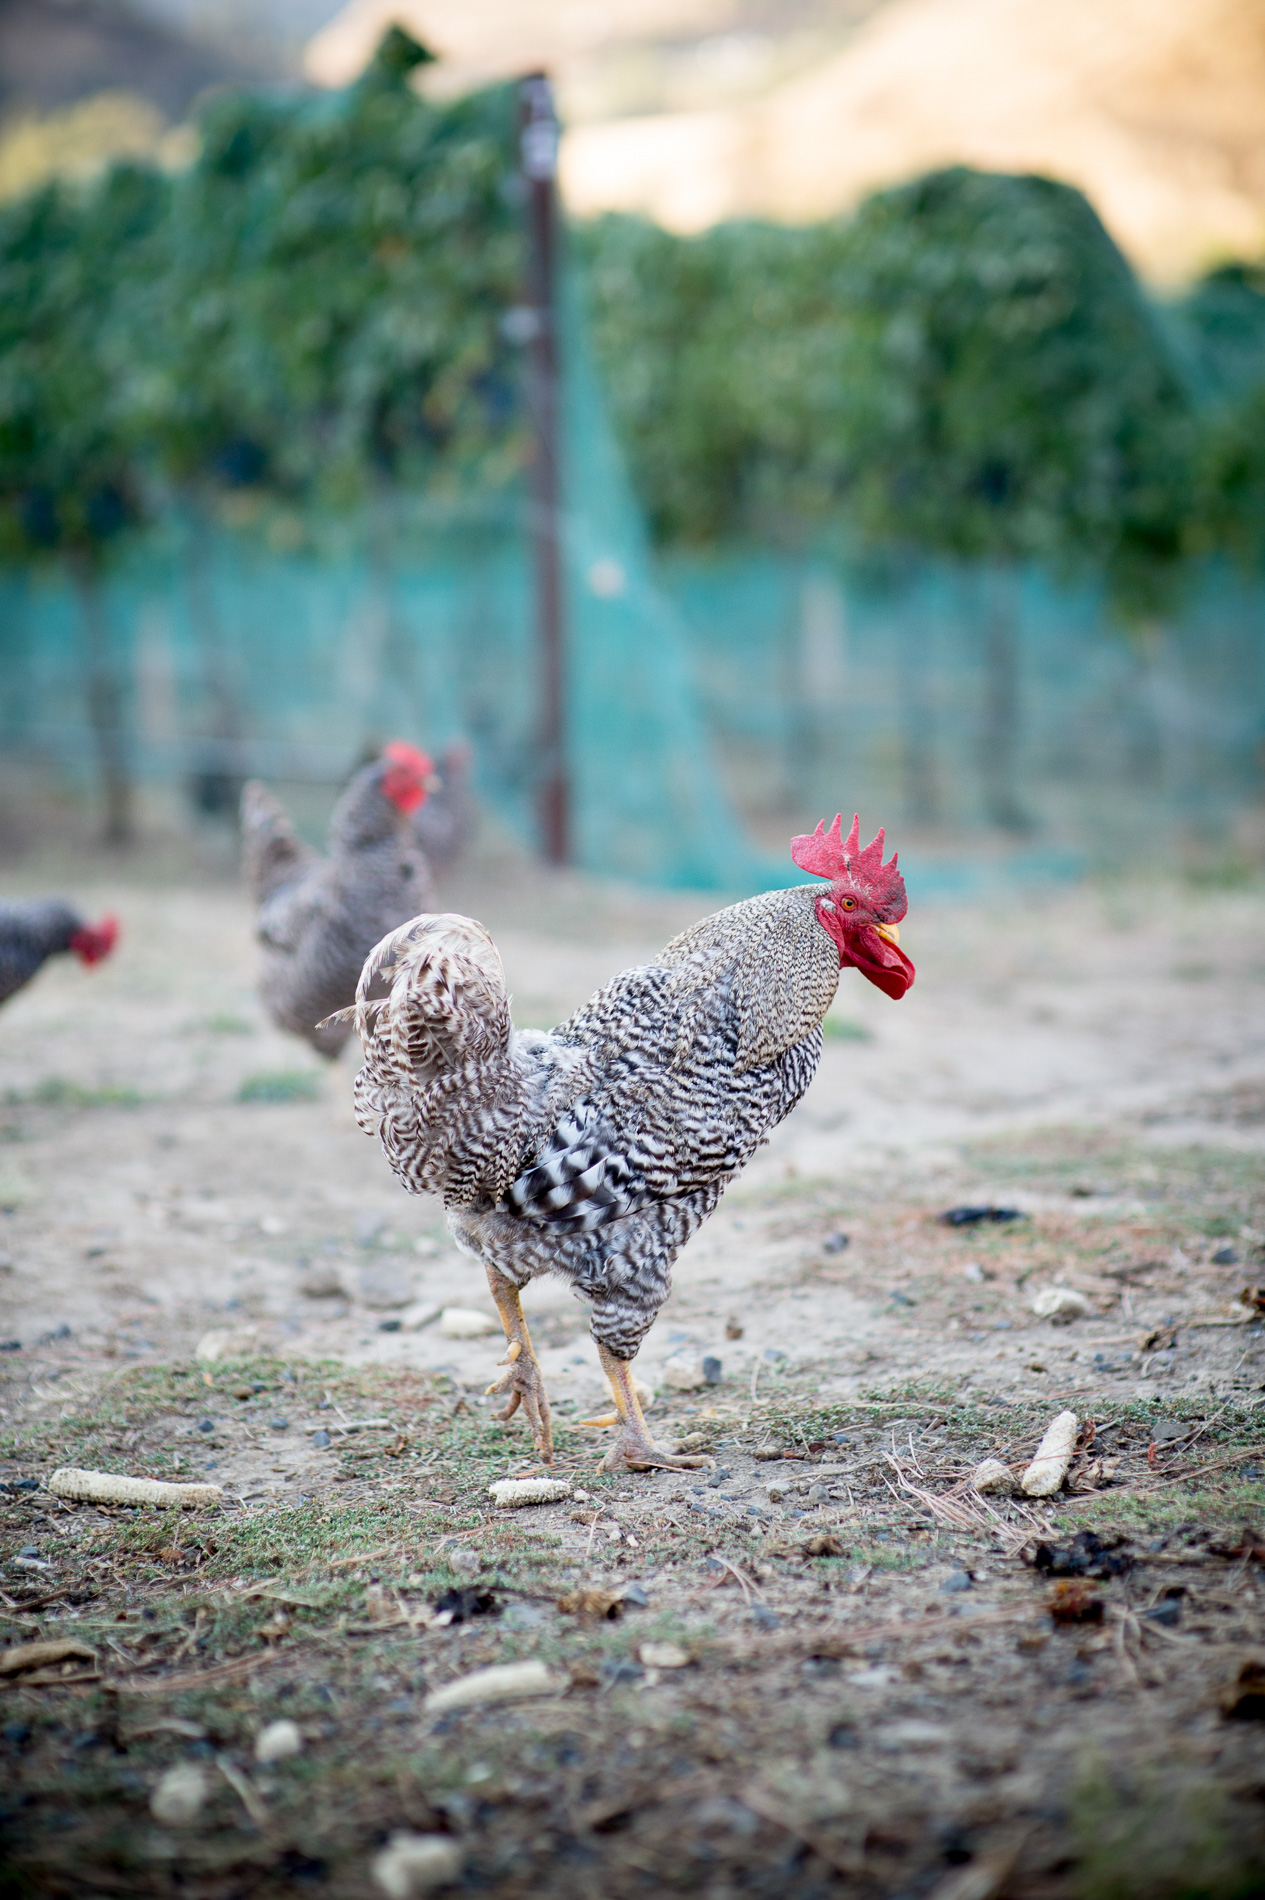 Roosters in a Vineyard